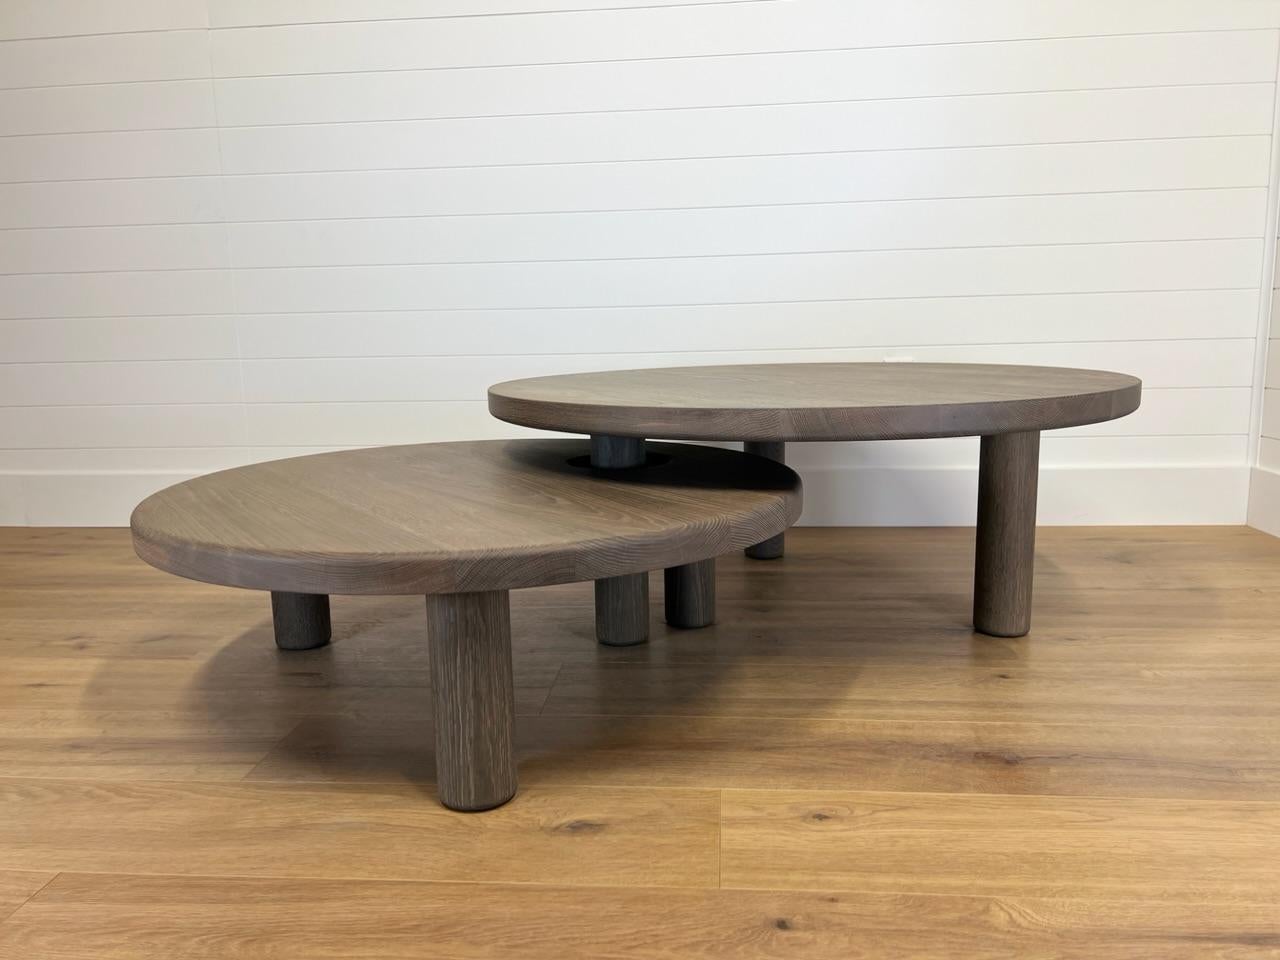 Shown in fumed weathered white oak that will patina over time. Interlocking nesting tables that can be customized in size. hand turned dowel legs.  Price is for the set of 2 tables. . 

44×16 (upper) 36×14 (lower with leg opening)

Available in